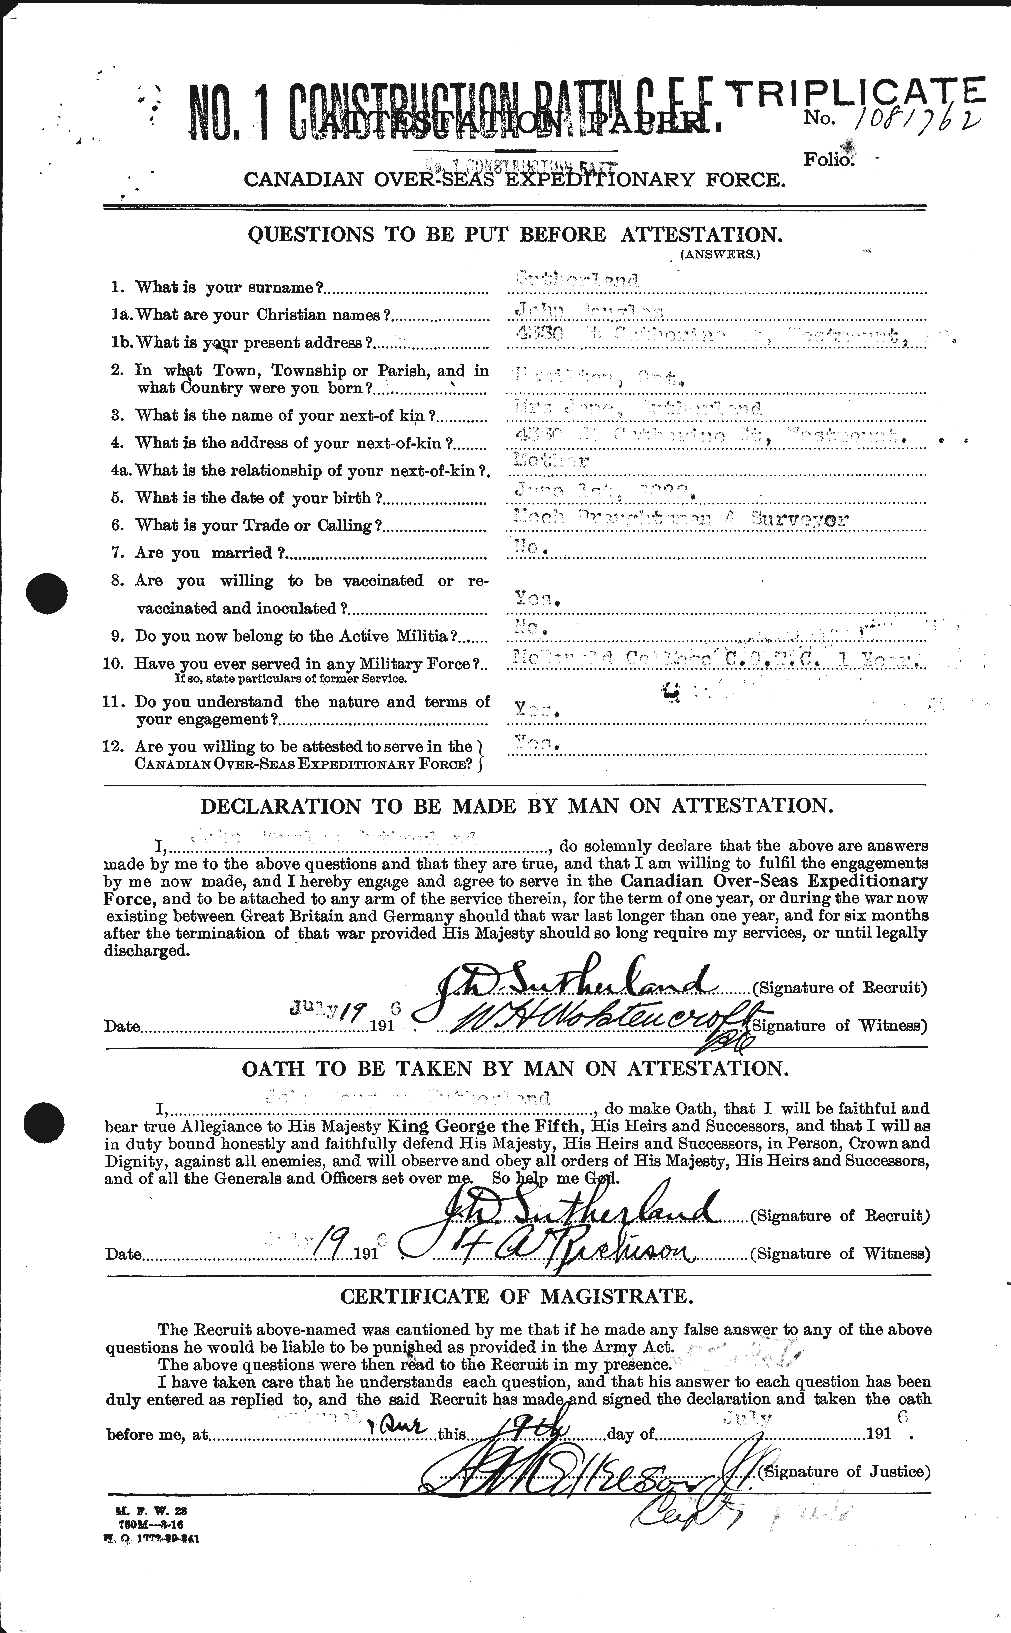 Personnel Records of the First World War - CEF 124696a